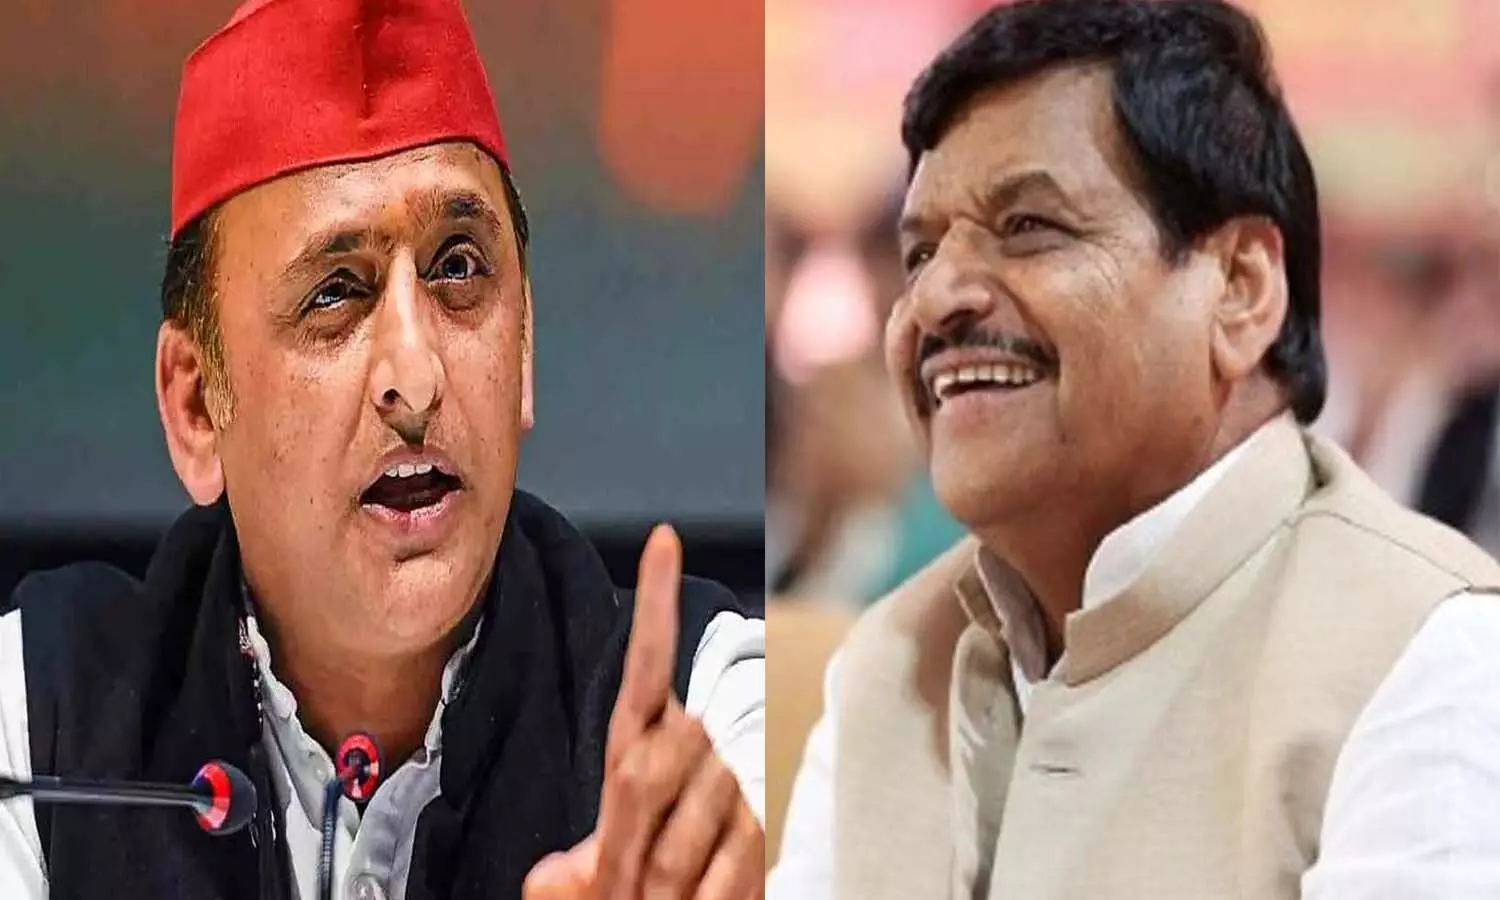 Shivpal said about the presidential election, how can he support Yashwant Sinha, who insulted Netaji